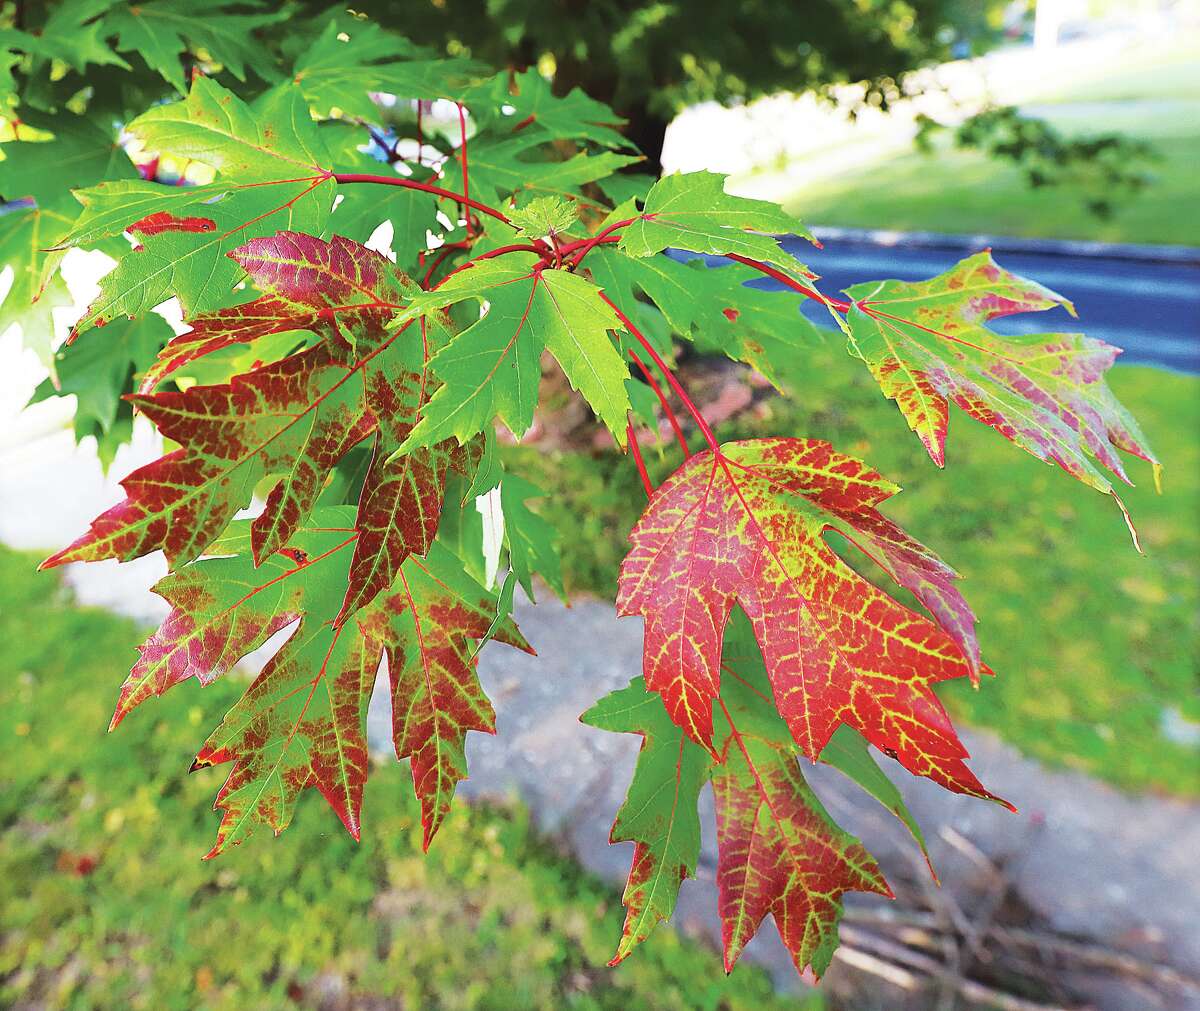 John Badman|The Telegraph It may have felt more like summer Tuesday with record breaking temperatures near 100 degrees but that didn't fool the trees in the area which have begun their fall change.